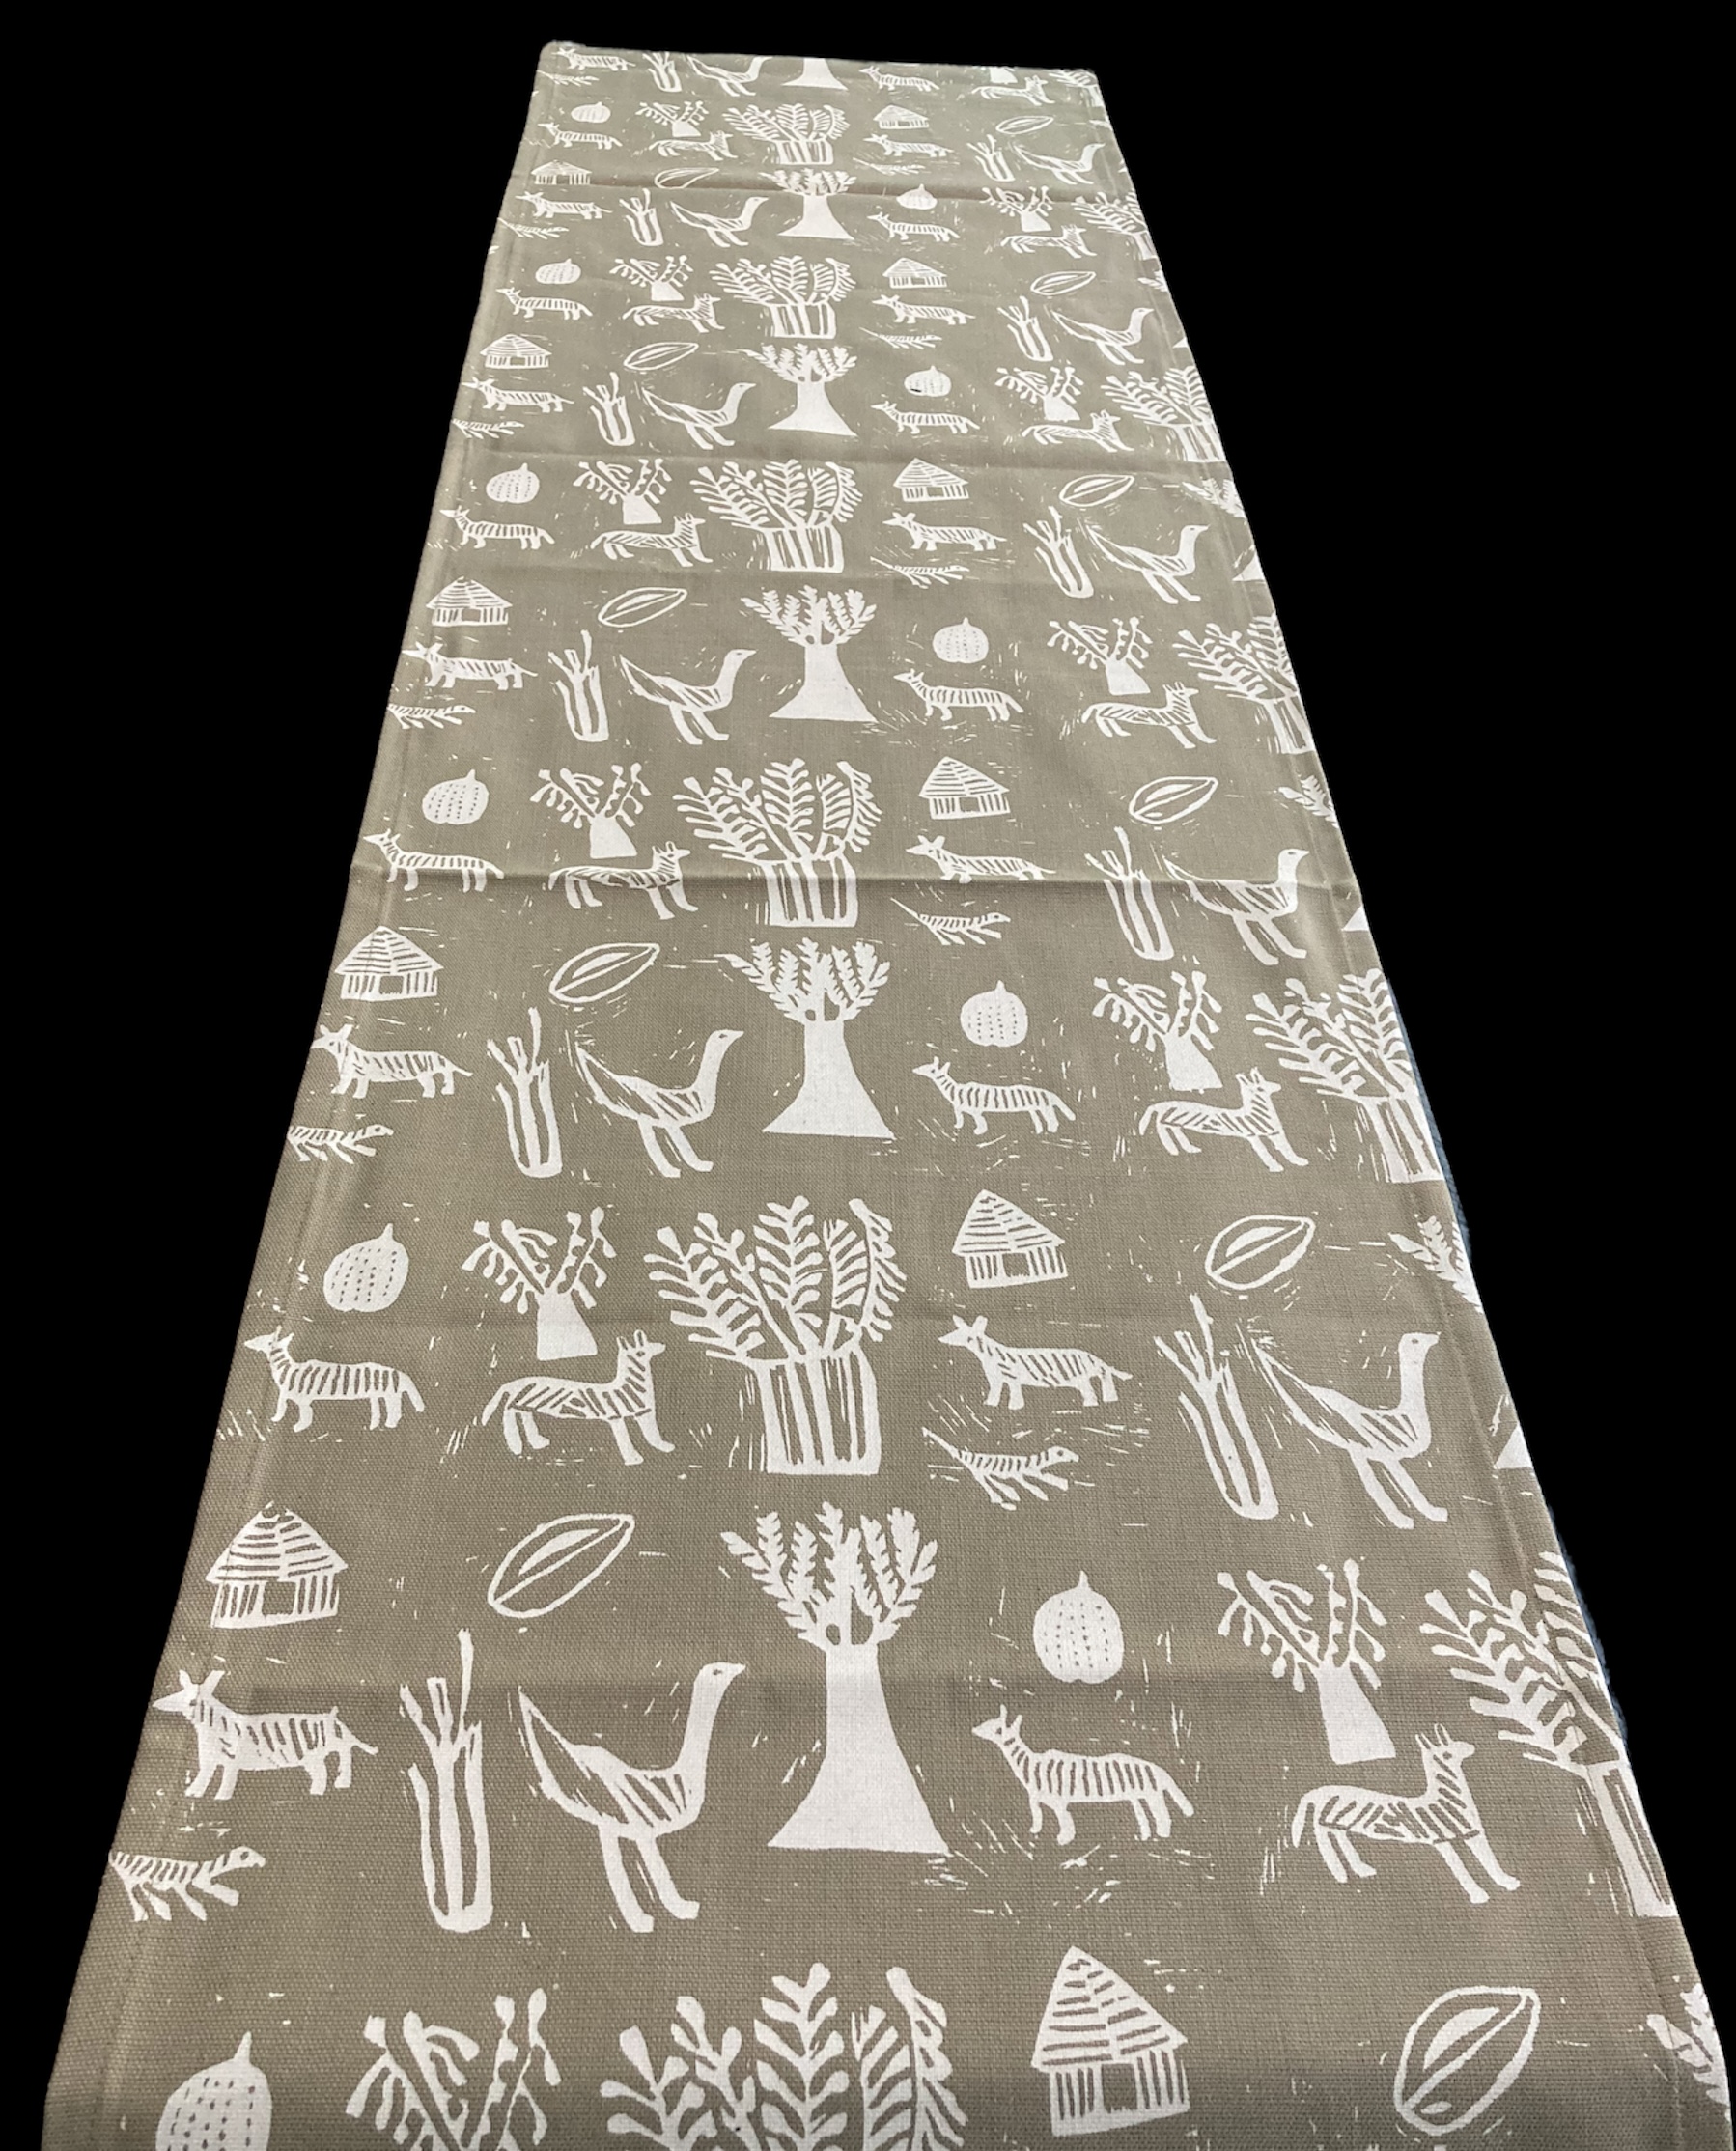 100% cotton Table Runner 96" x 16" from Namibia - Design 15l